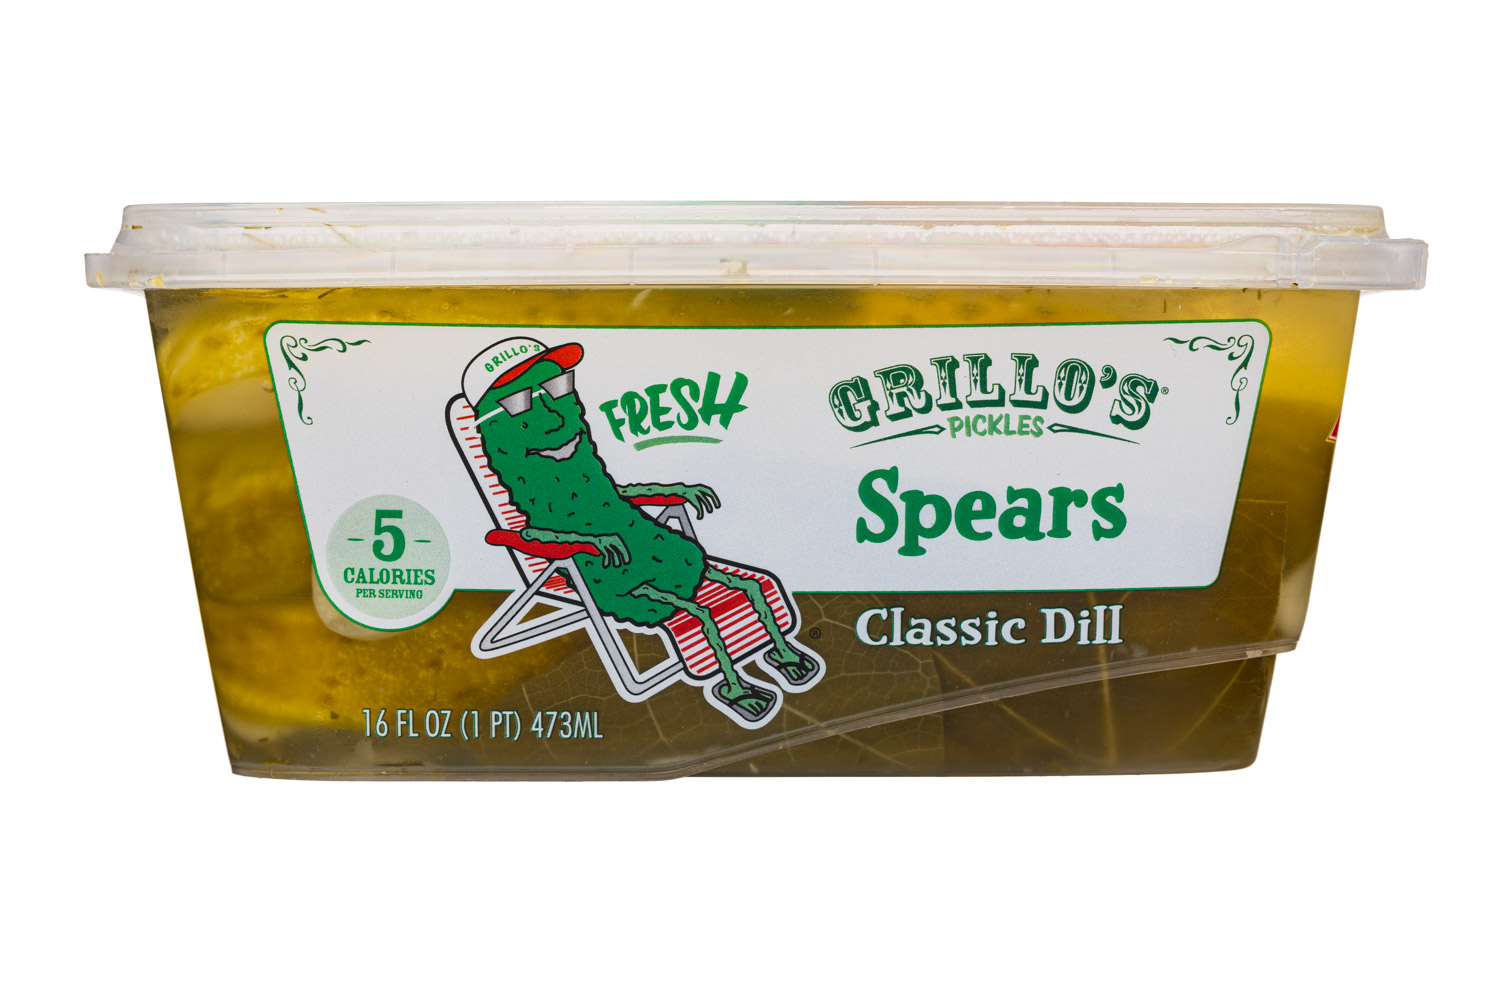 Classic Dill - Spears